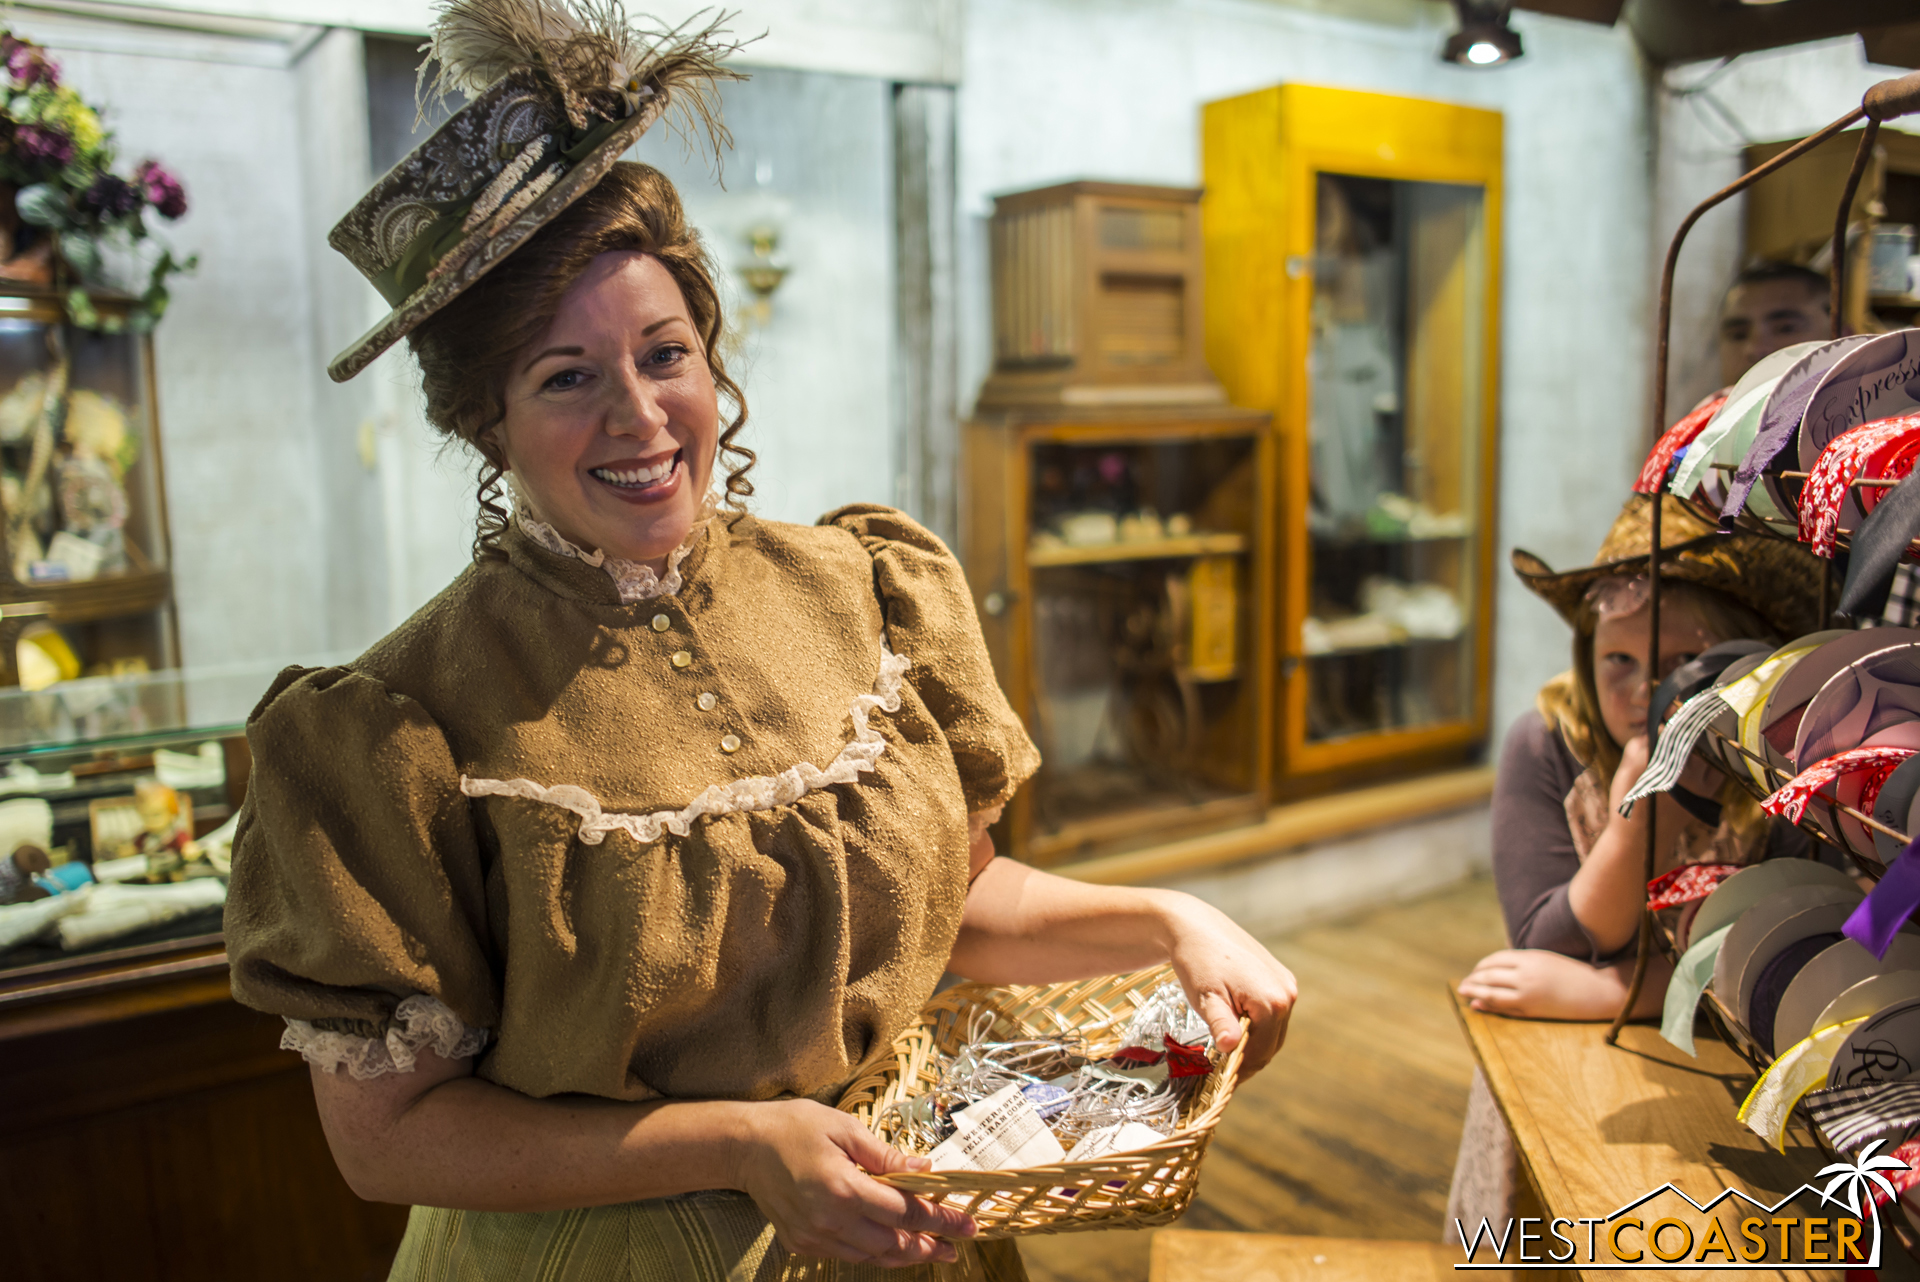  Gertie offers service with a smile and has also designed dresses for the Calico Saloon girls who are performing in town. 